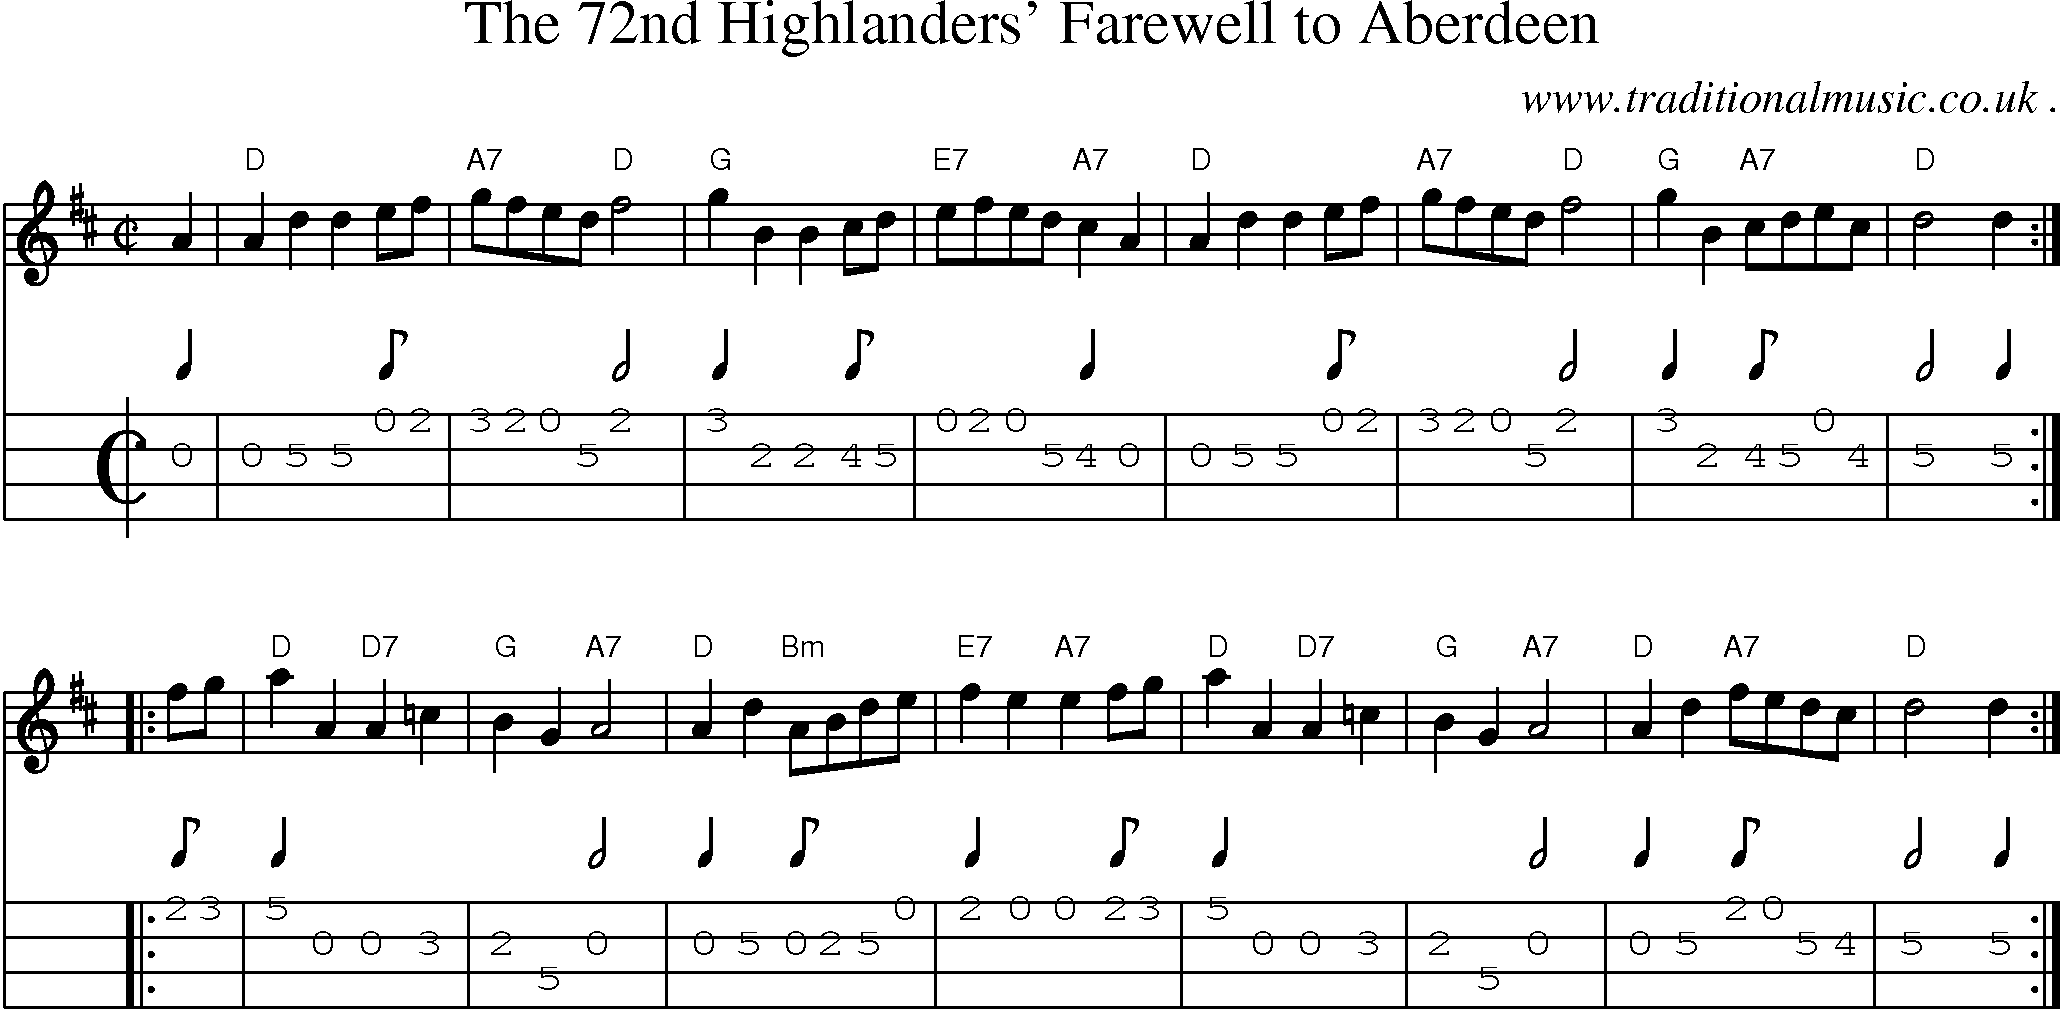 Sheet-music  score, Chords and Mandolin Tabs for The 72nd Highlanders Farewell To Aberdeen